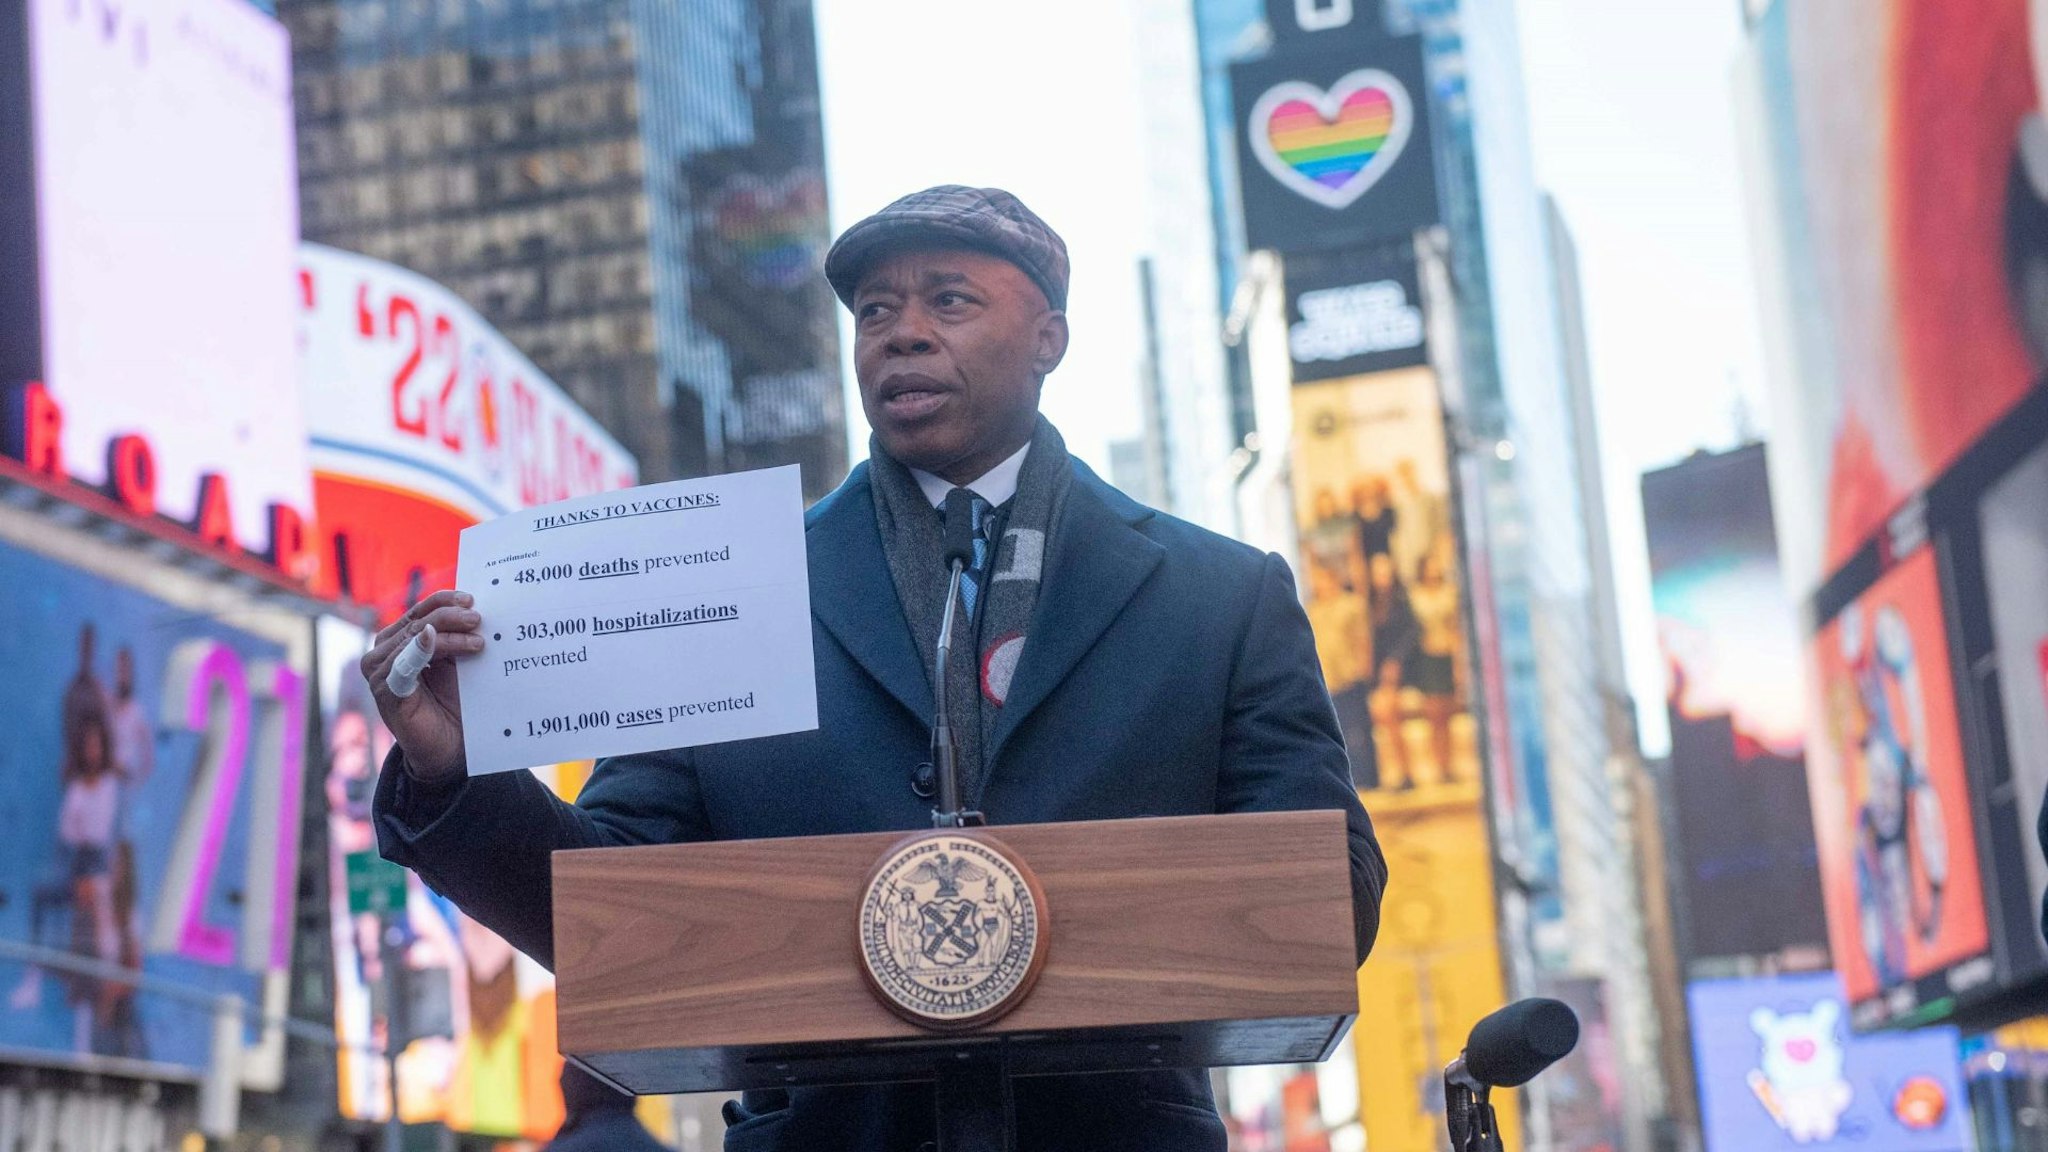 New York City Mayor Eric Adams speaks during a press briefing on Times Square in New York, the United States, March 4, 2022.